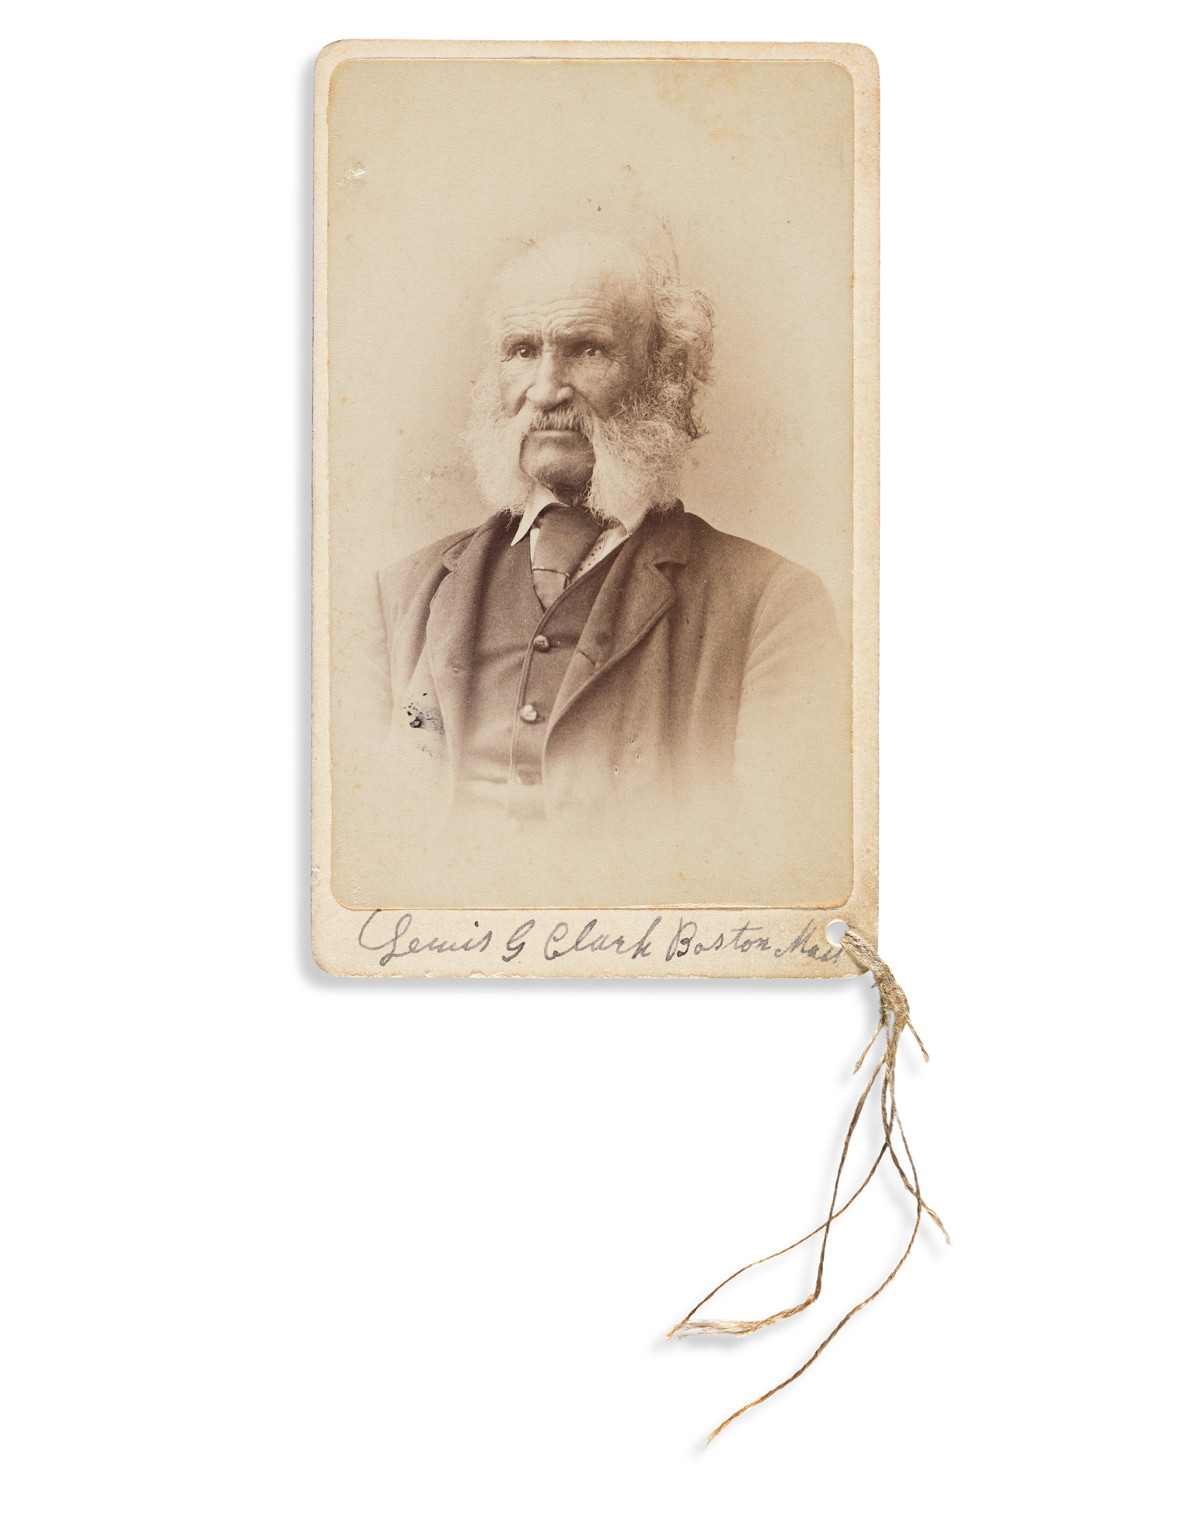 (SLAVERY AND ABOLITION.) Signed photograph of Lewis G. Clarke, inspiration for the escaped slave in Uncle Toms Cabin.